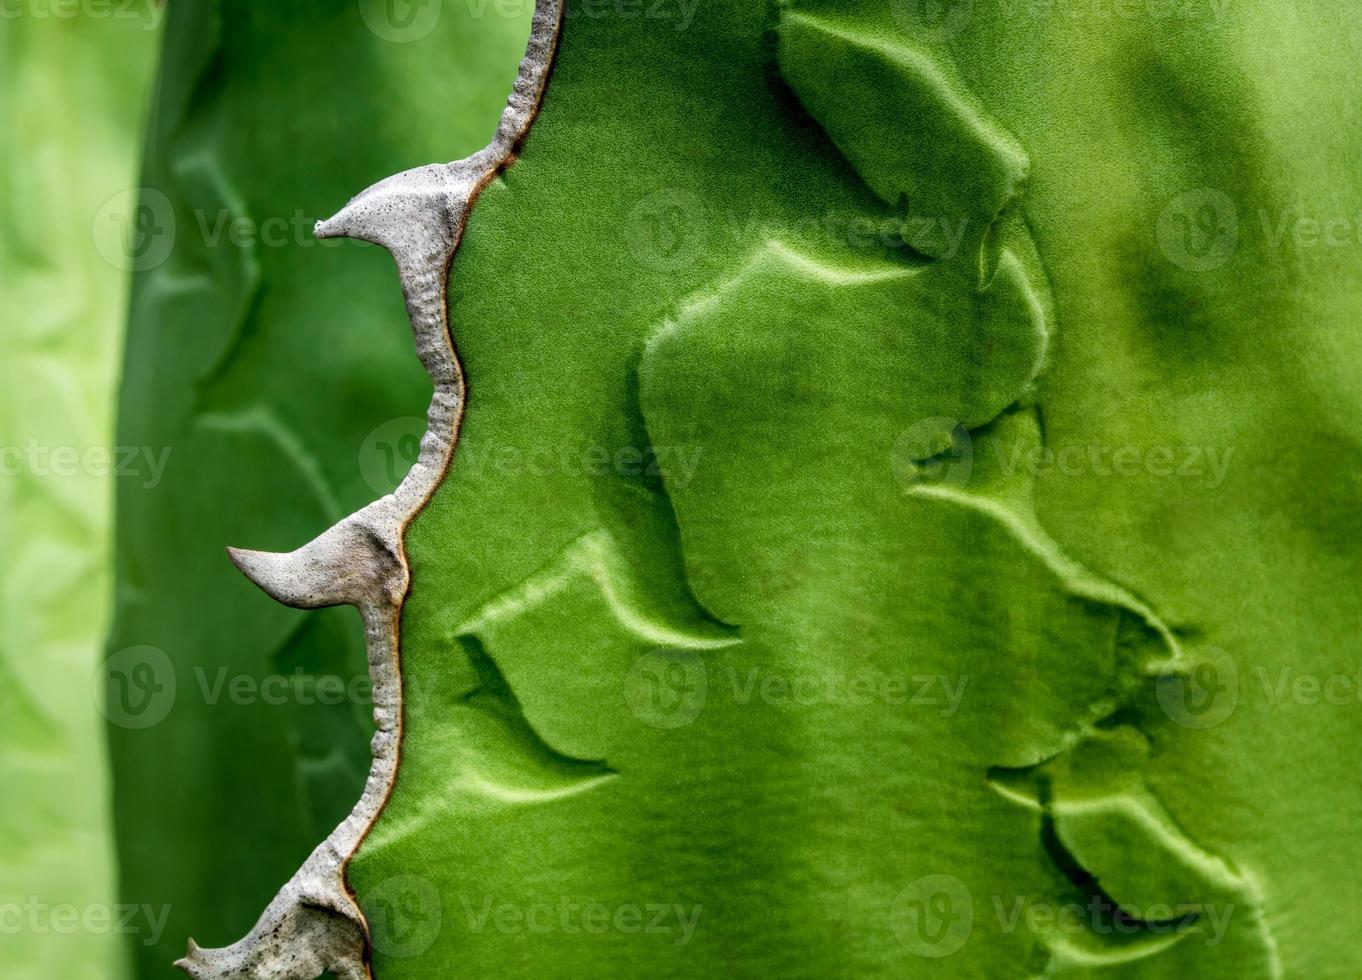 Succulent plant close-up, fresh leaves detail of Agave titanota Gentry photo